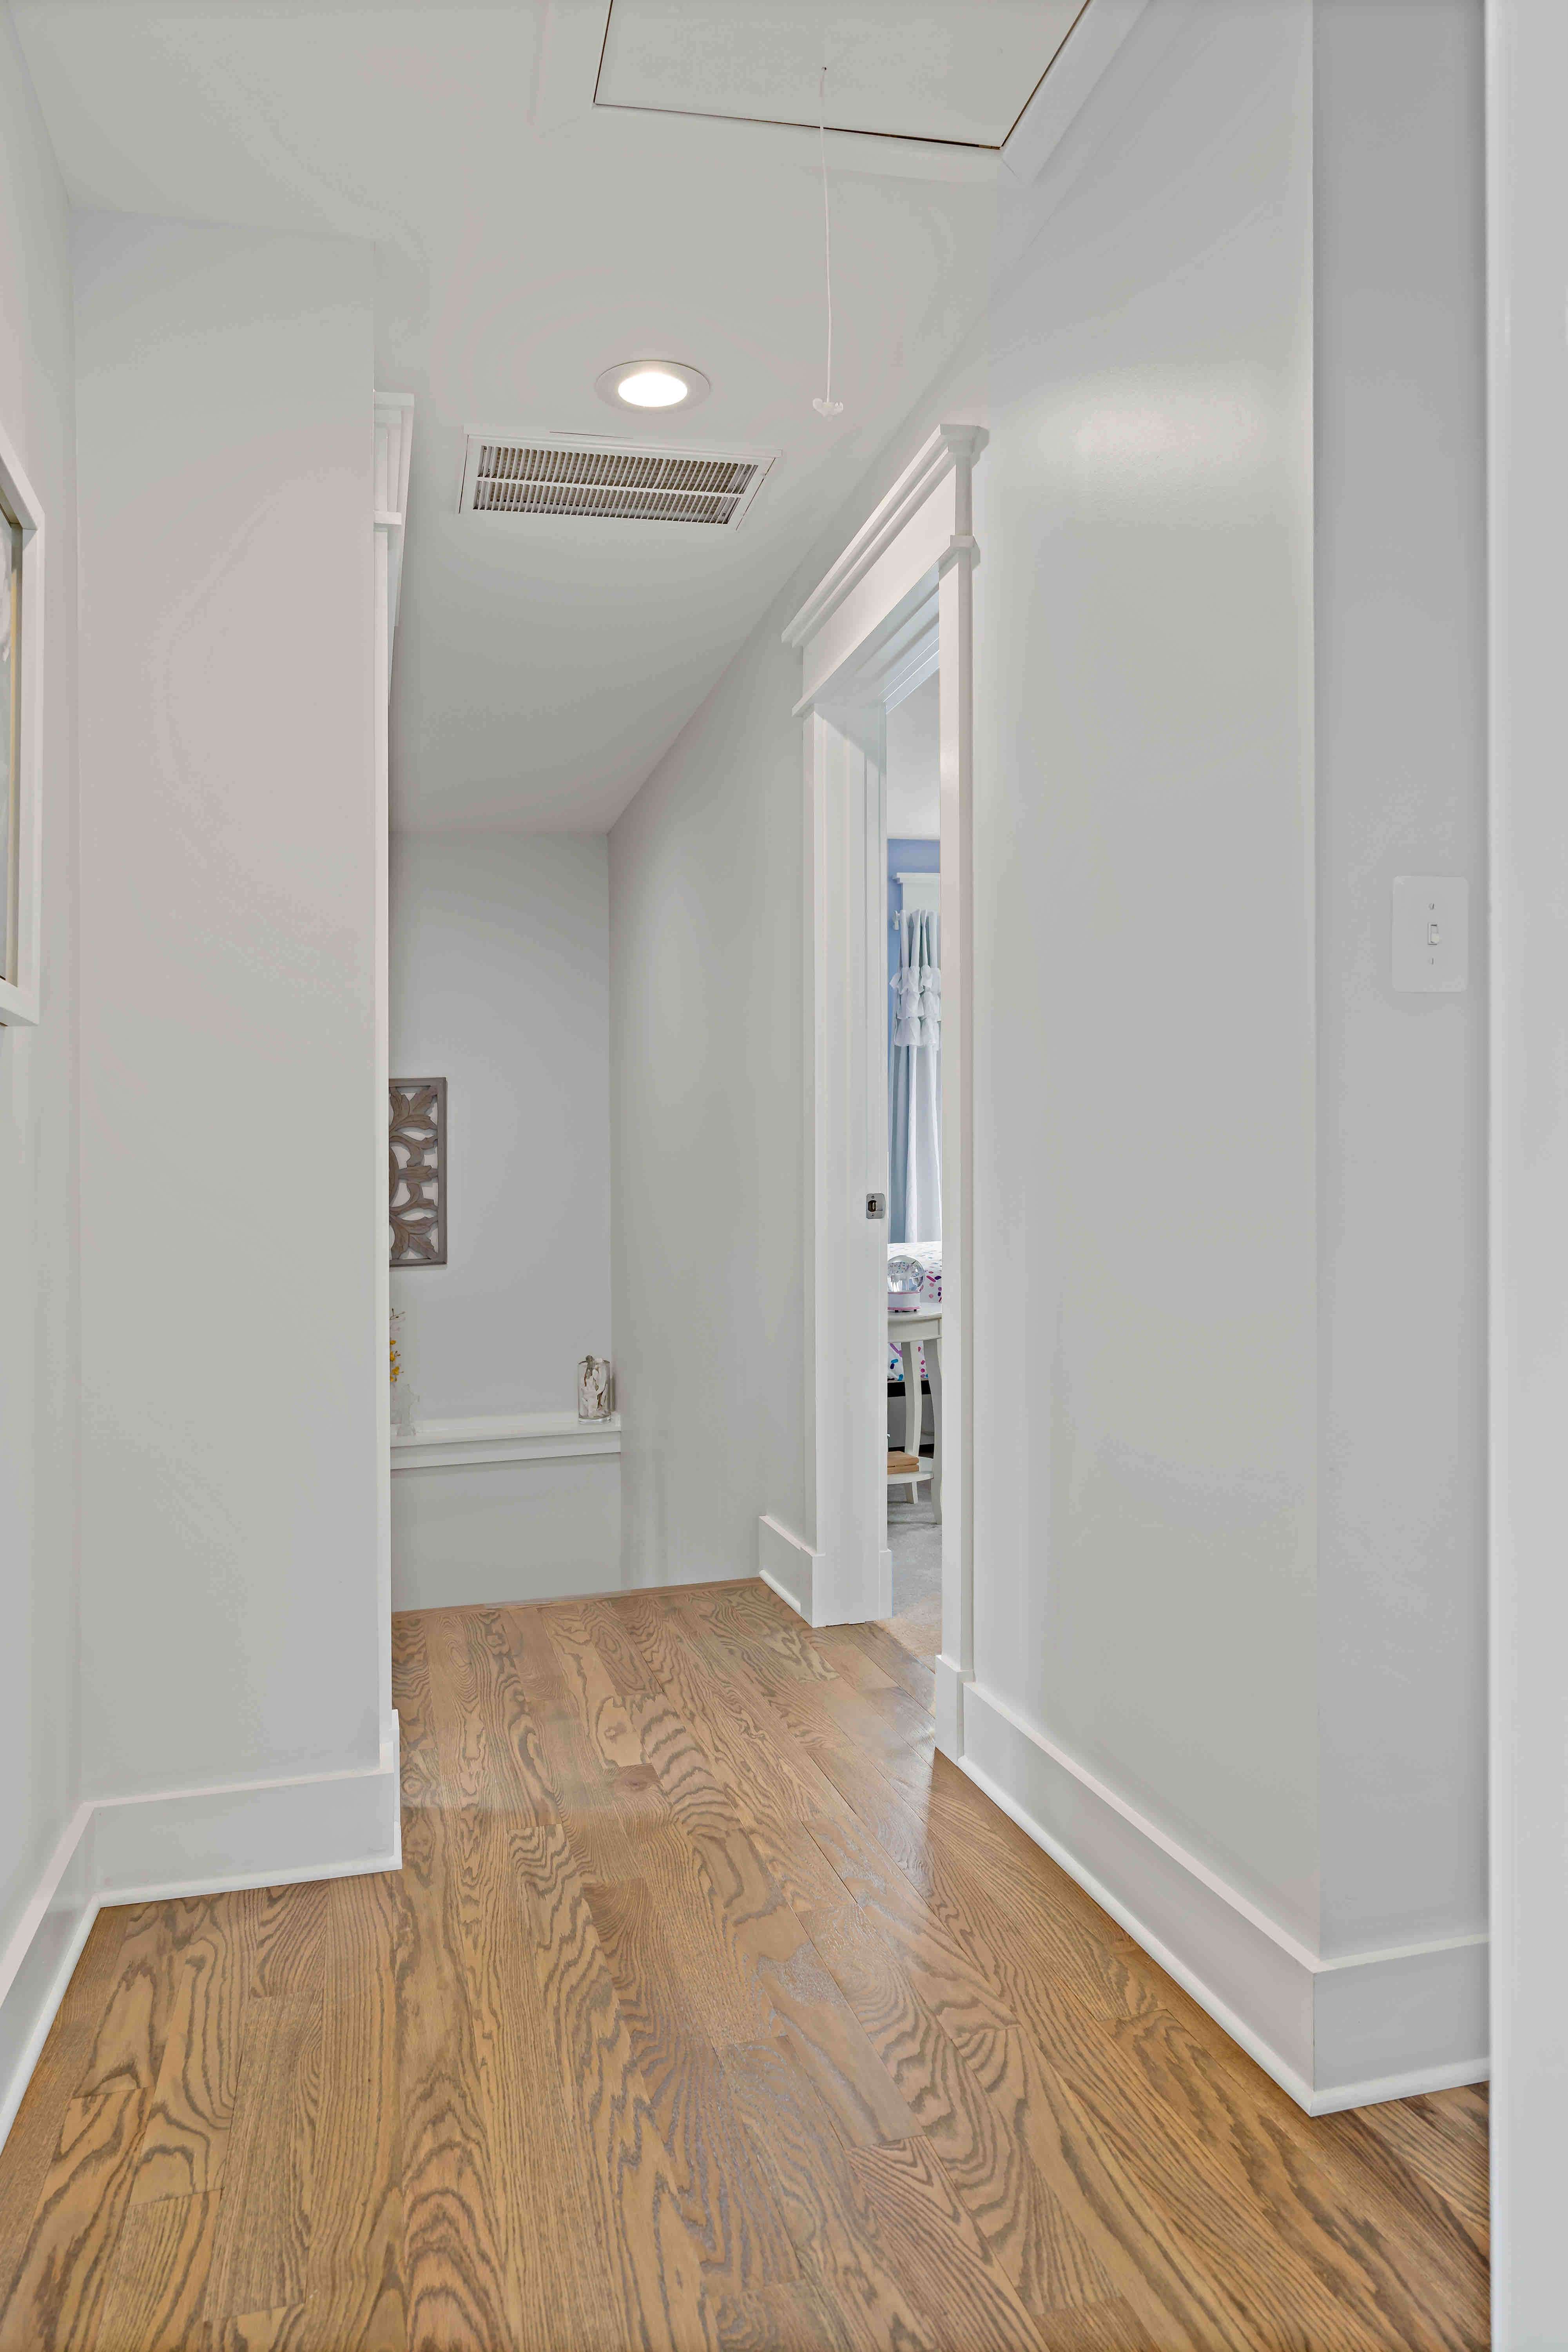 Hallway in house with hardwood floors and white walls